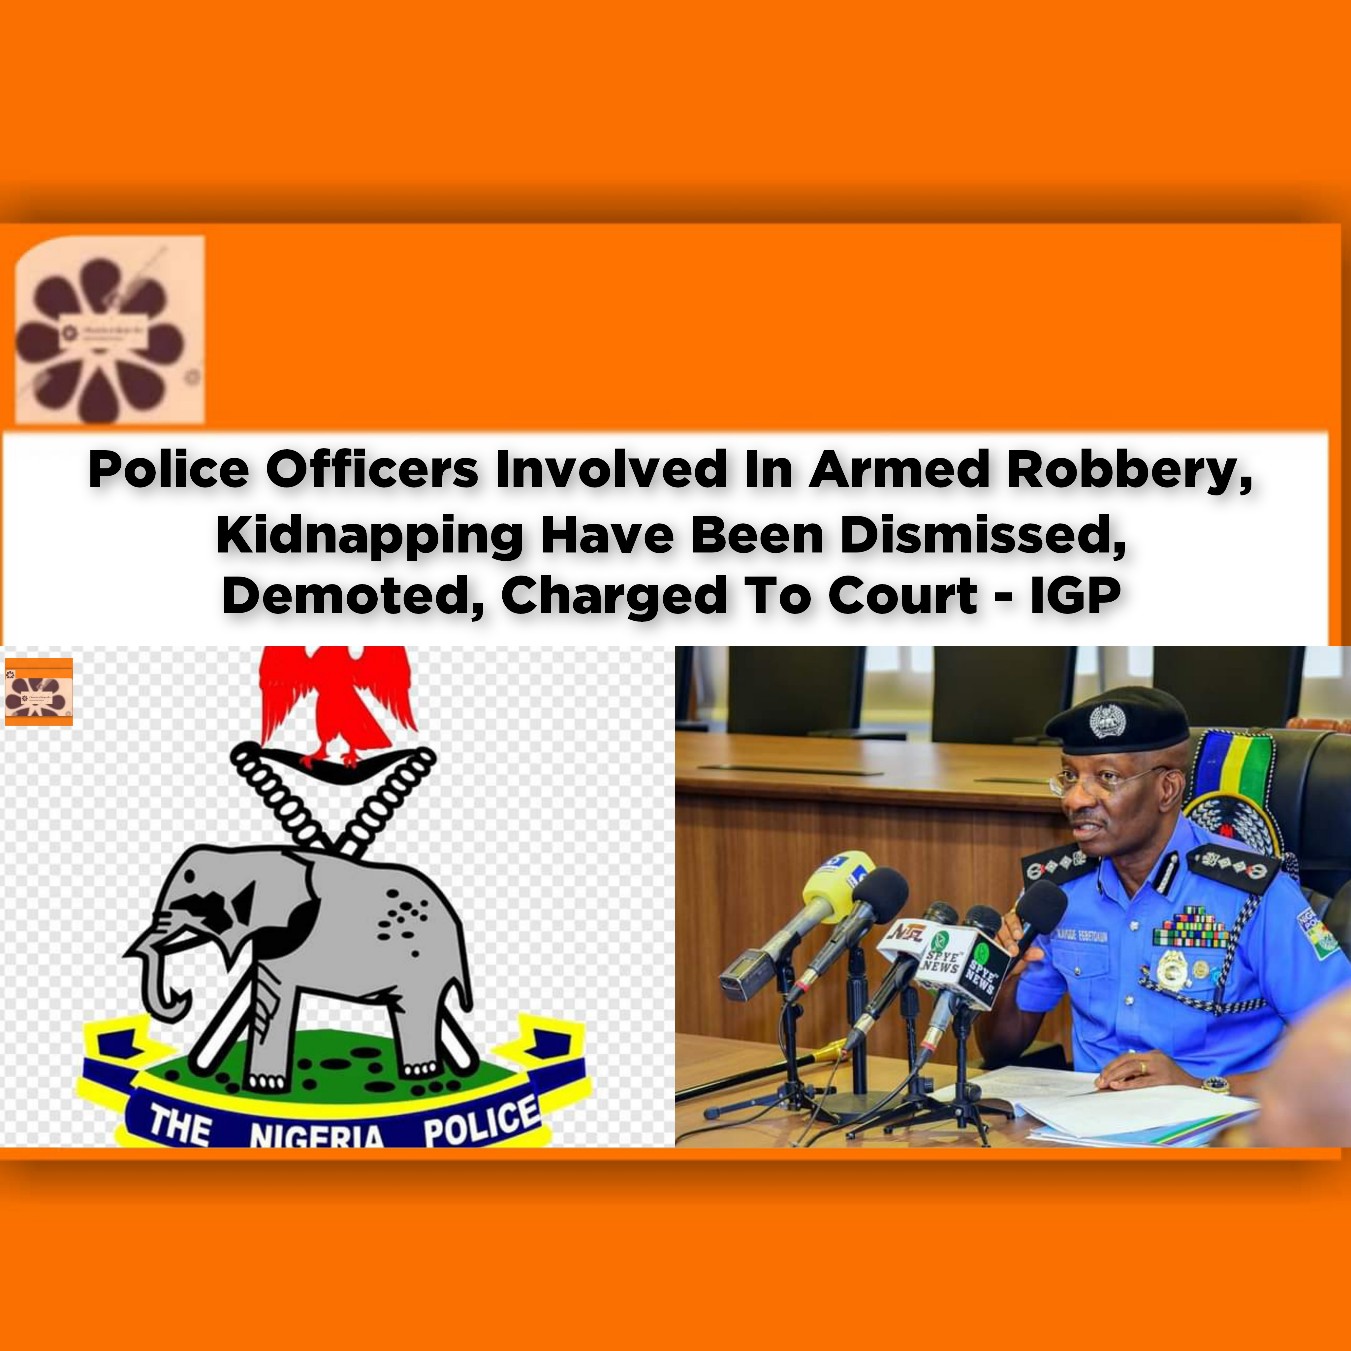 Police Officers Involved In Armed Robbery, Kidnapping Have Been Dismissed, Demoted, Charged To Court - IGP ~ OsazuwaAkonedo #Igp #Police #Robbery